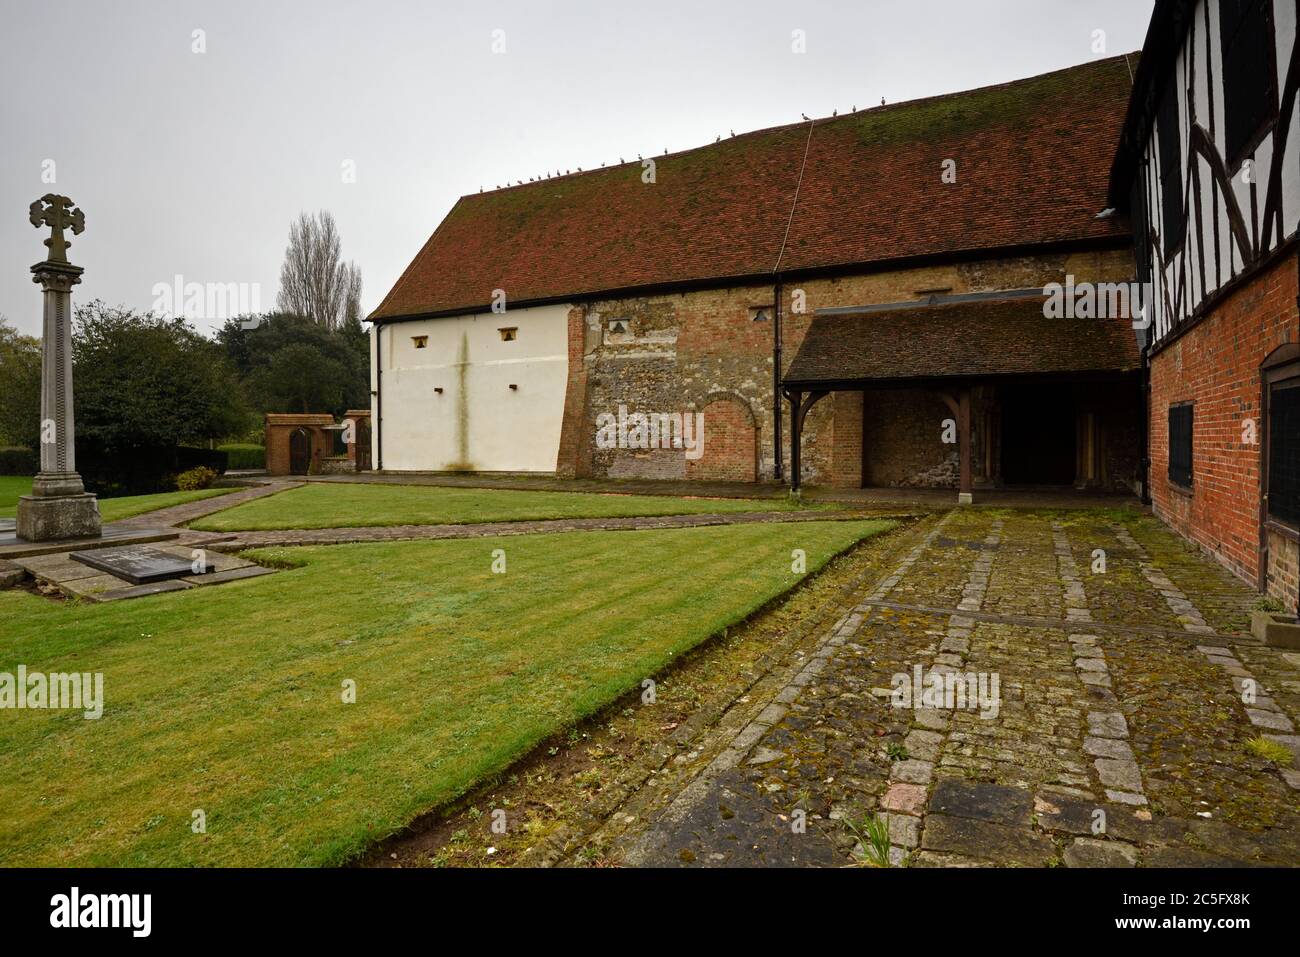 Prittlewell Priory at Prittlewell in Priory Park, Southend, Essex. Stock Photo